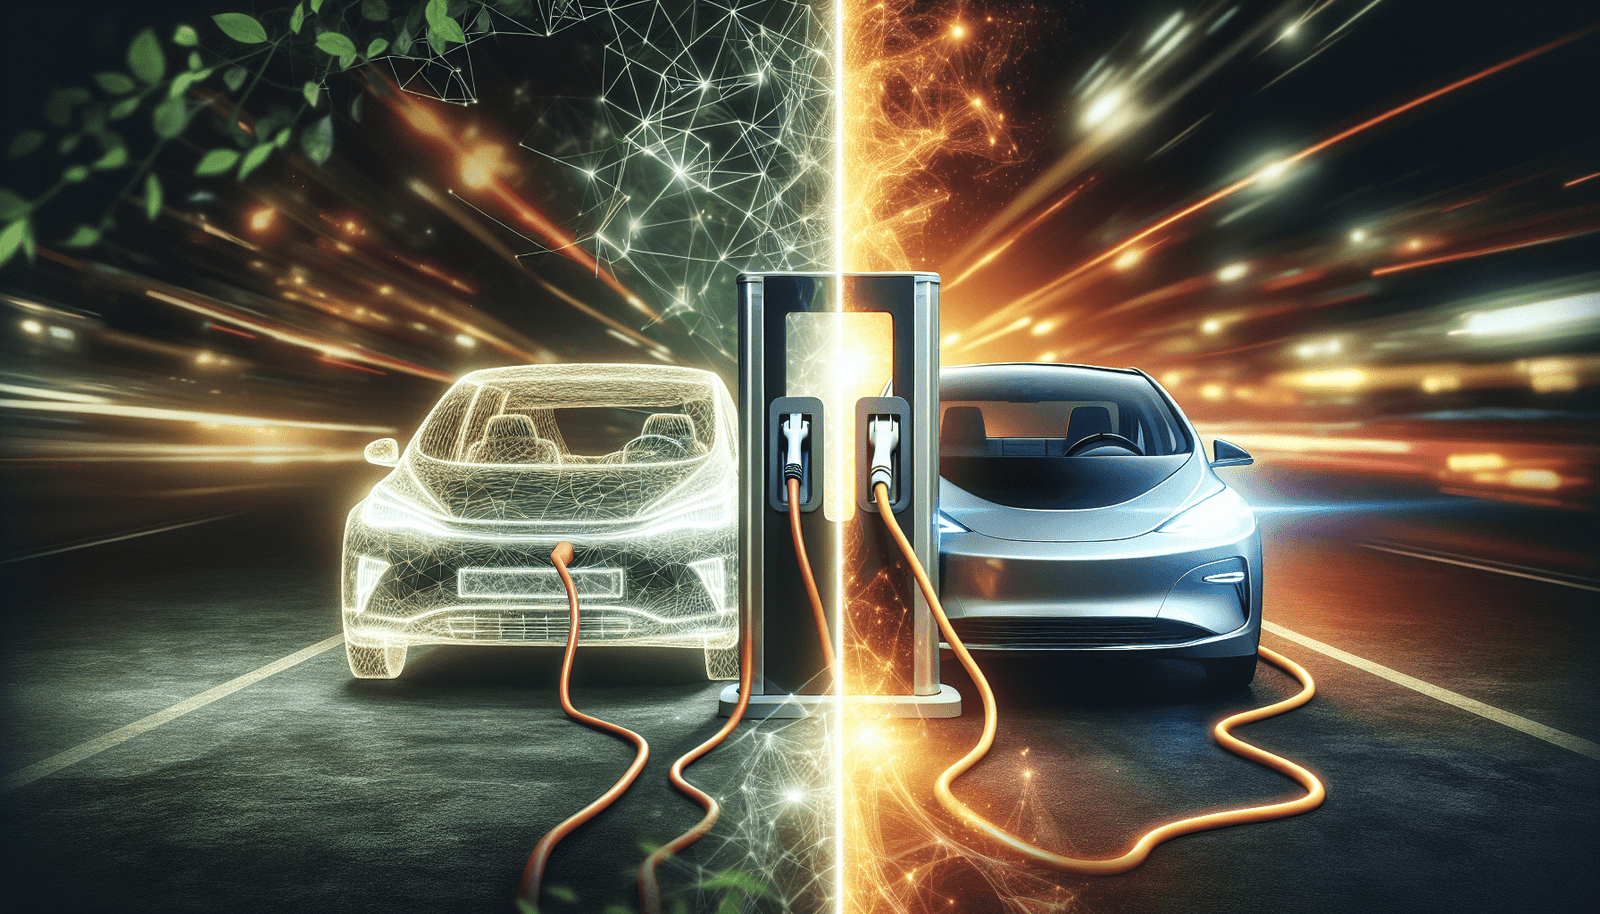 What Are The Options For Converting Existing Cars Into Electric Vehicles?